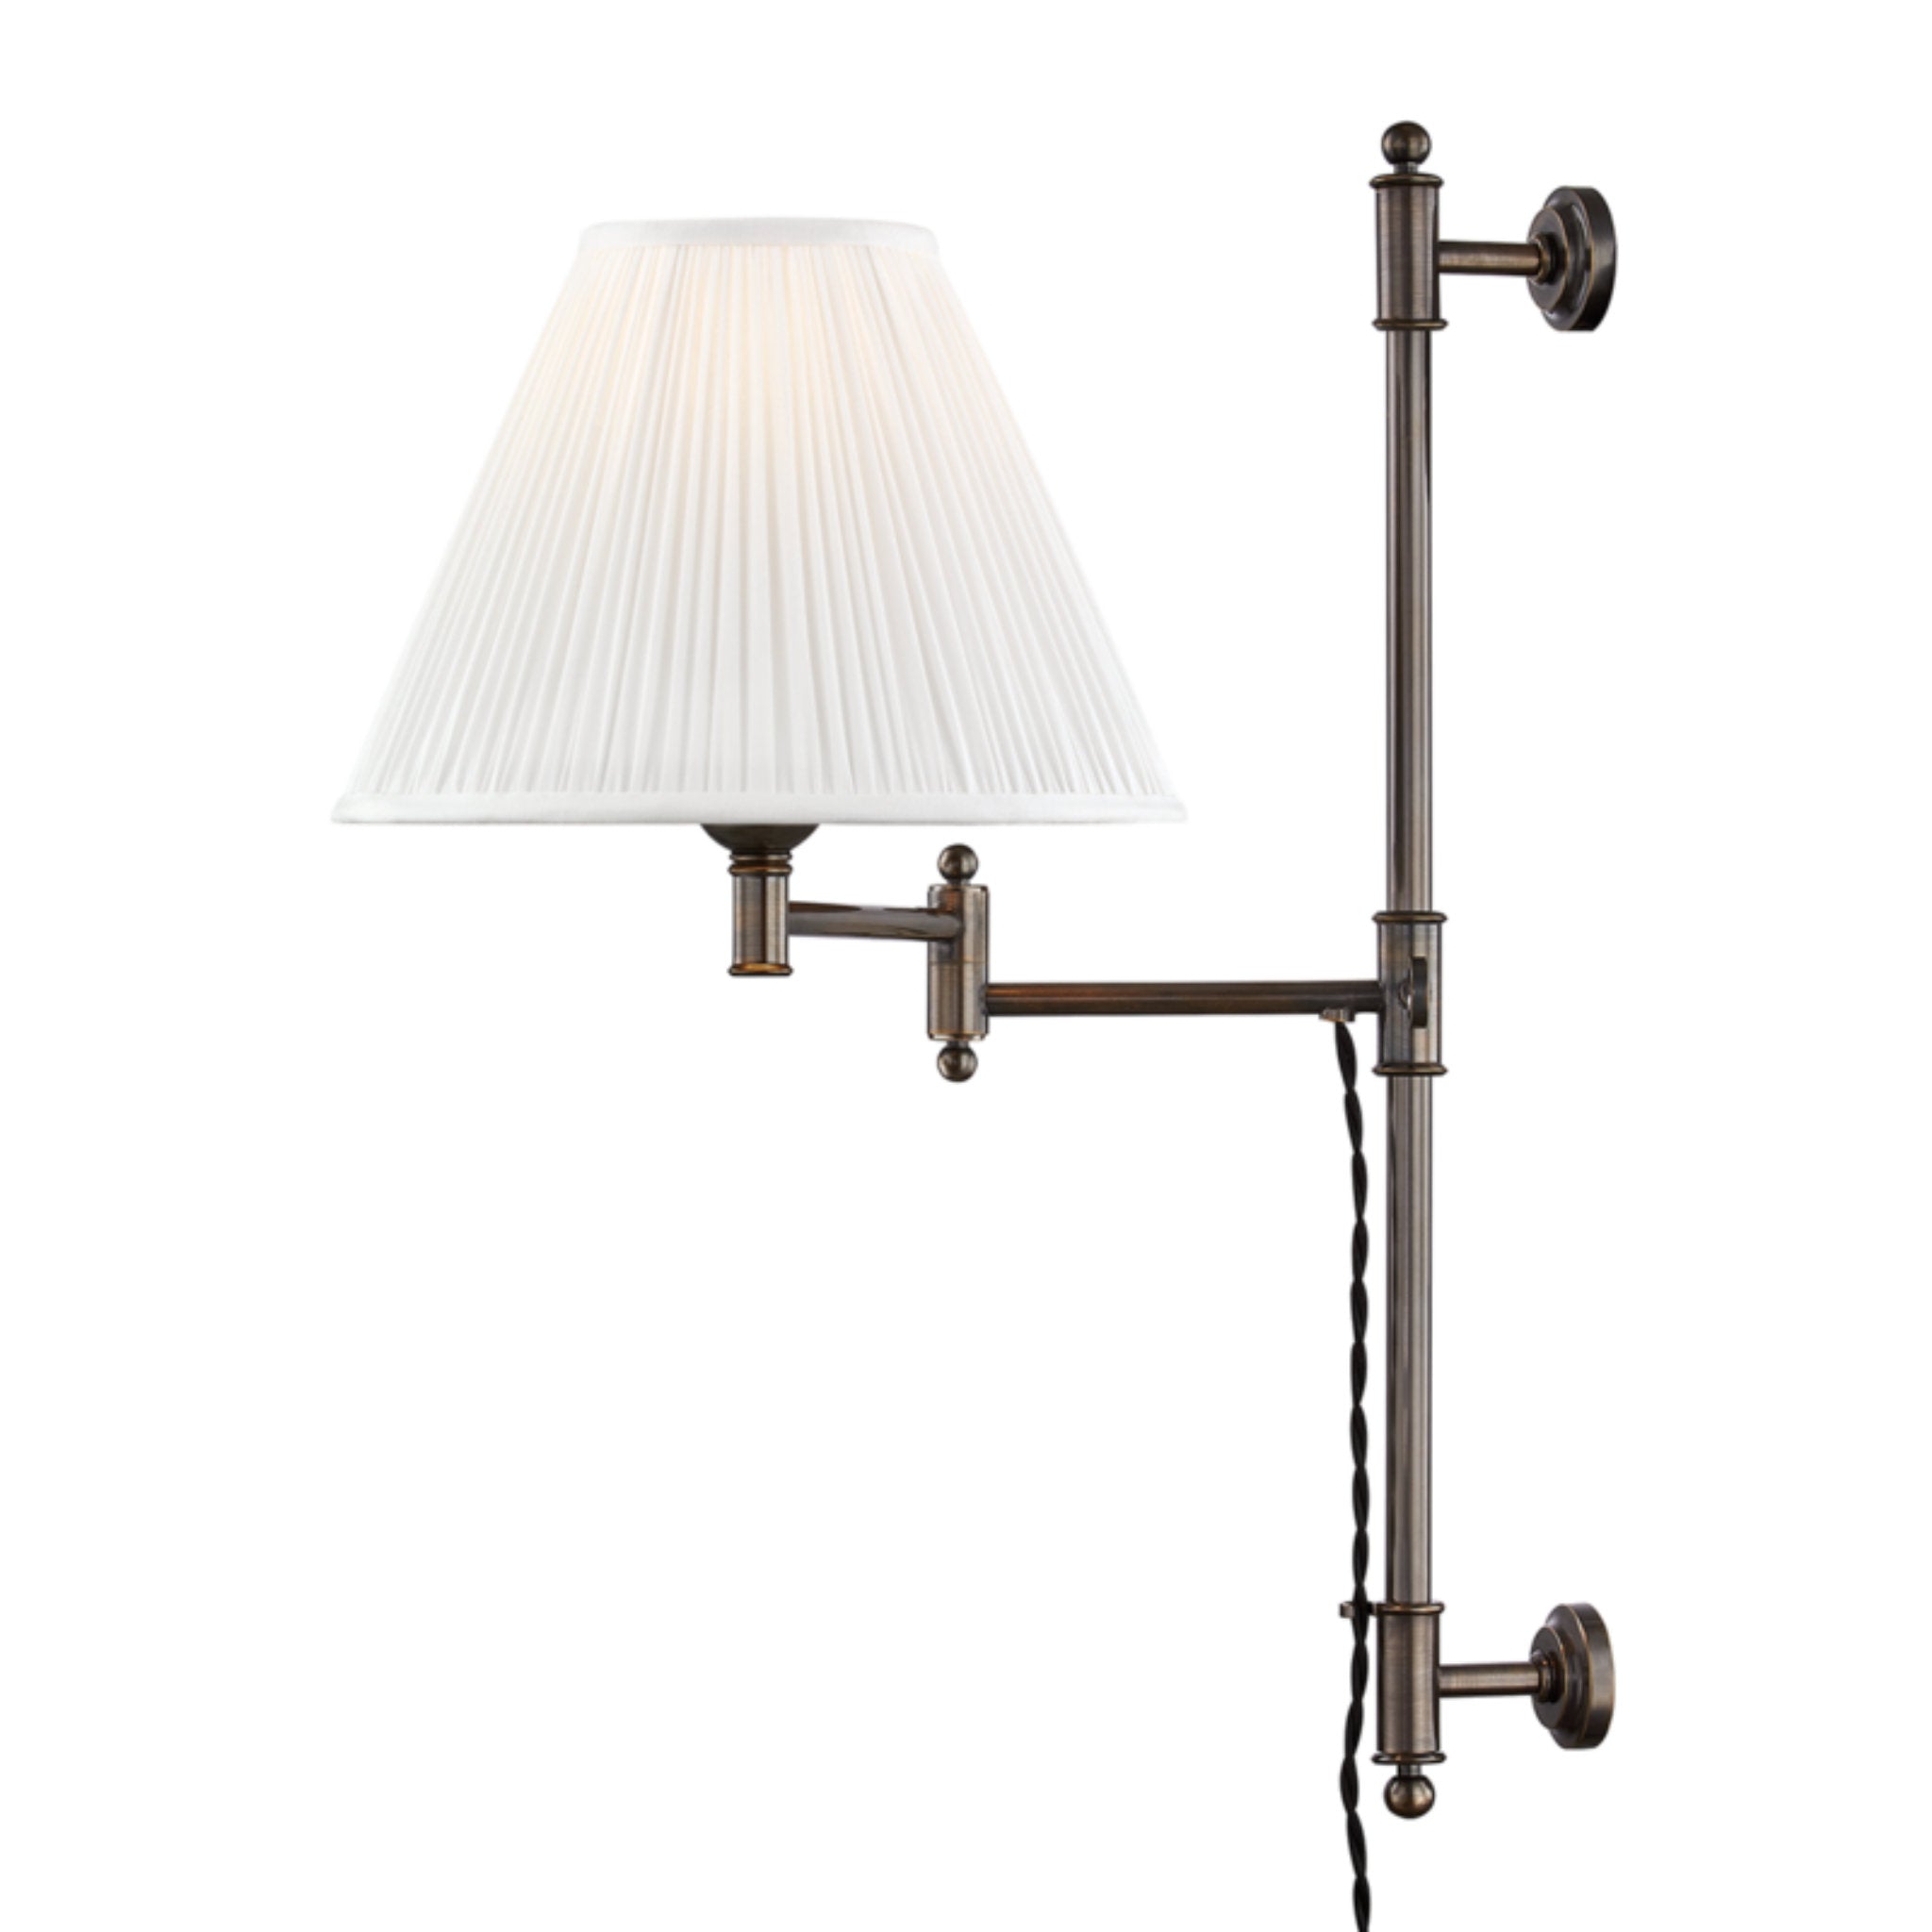 Classic No.1 1 Light Plug-in Sconce in Distressed Bronze by Mark D. Sikes